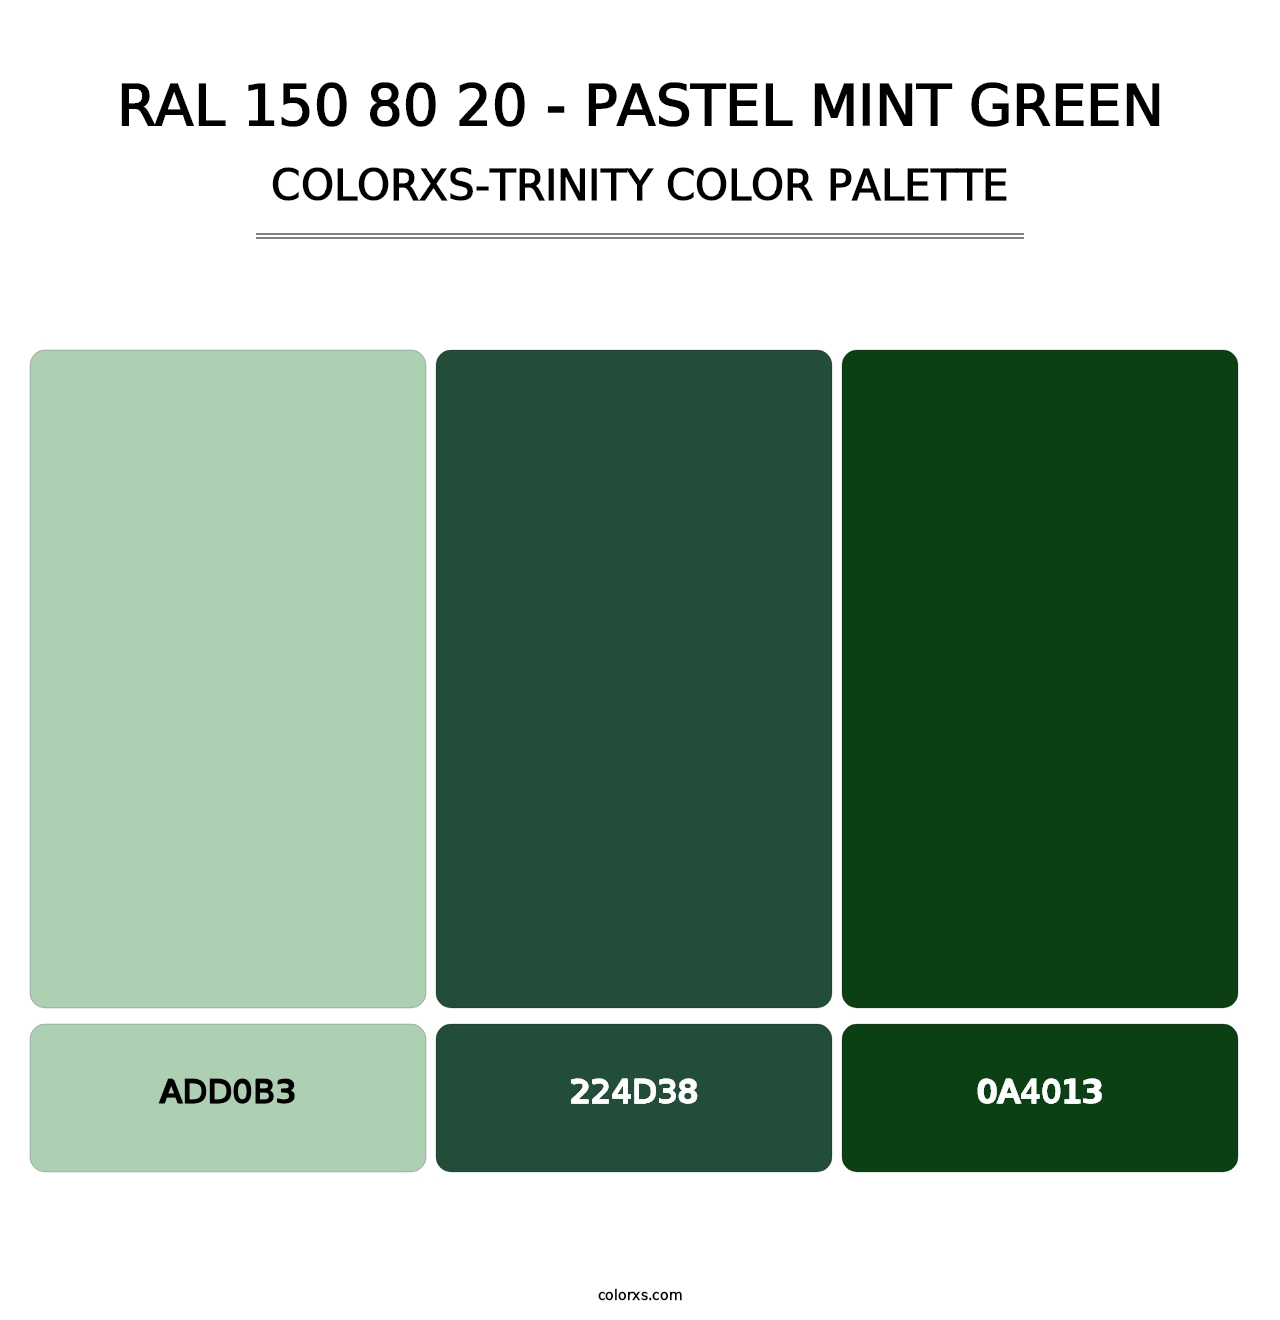 RAL 150 80 20 - Pastel Mint Green - Colorxs Trinity Palette